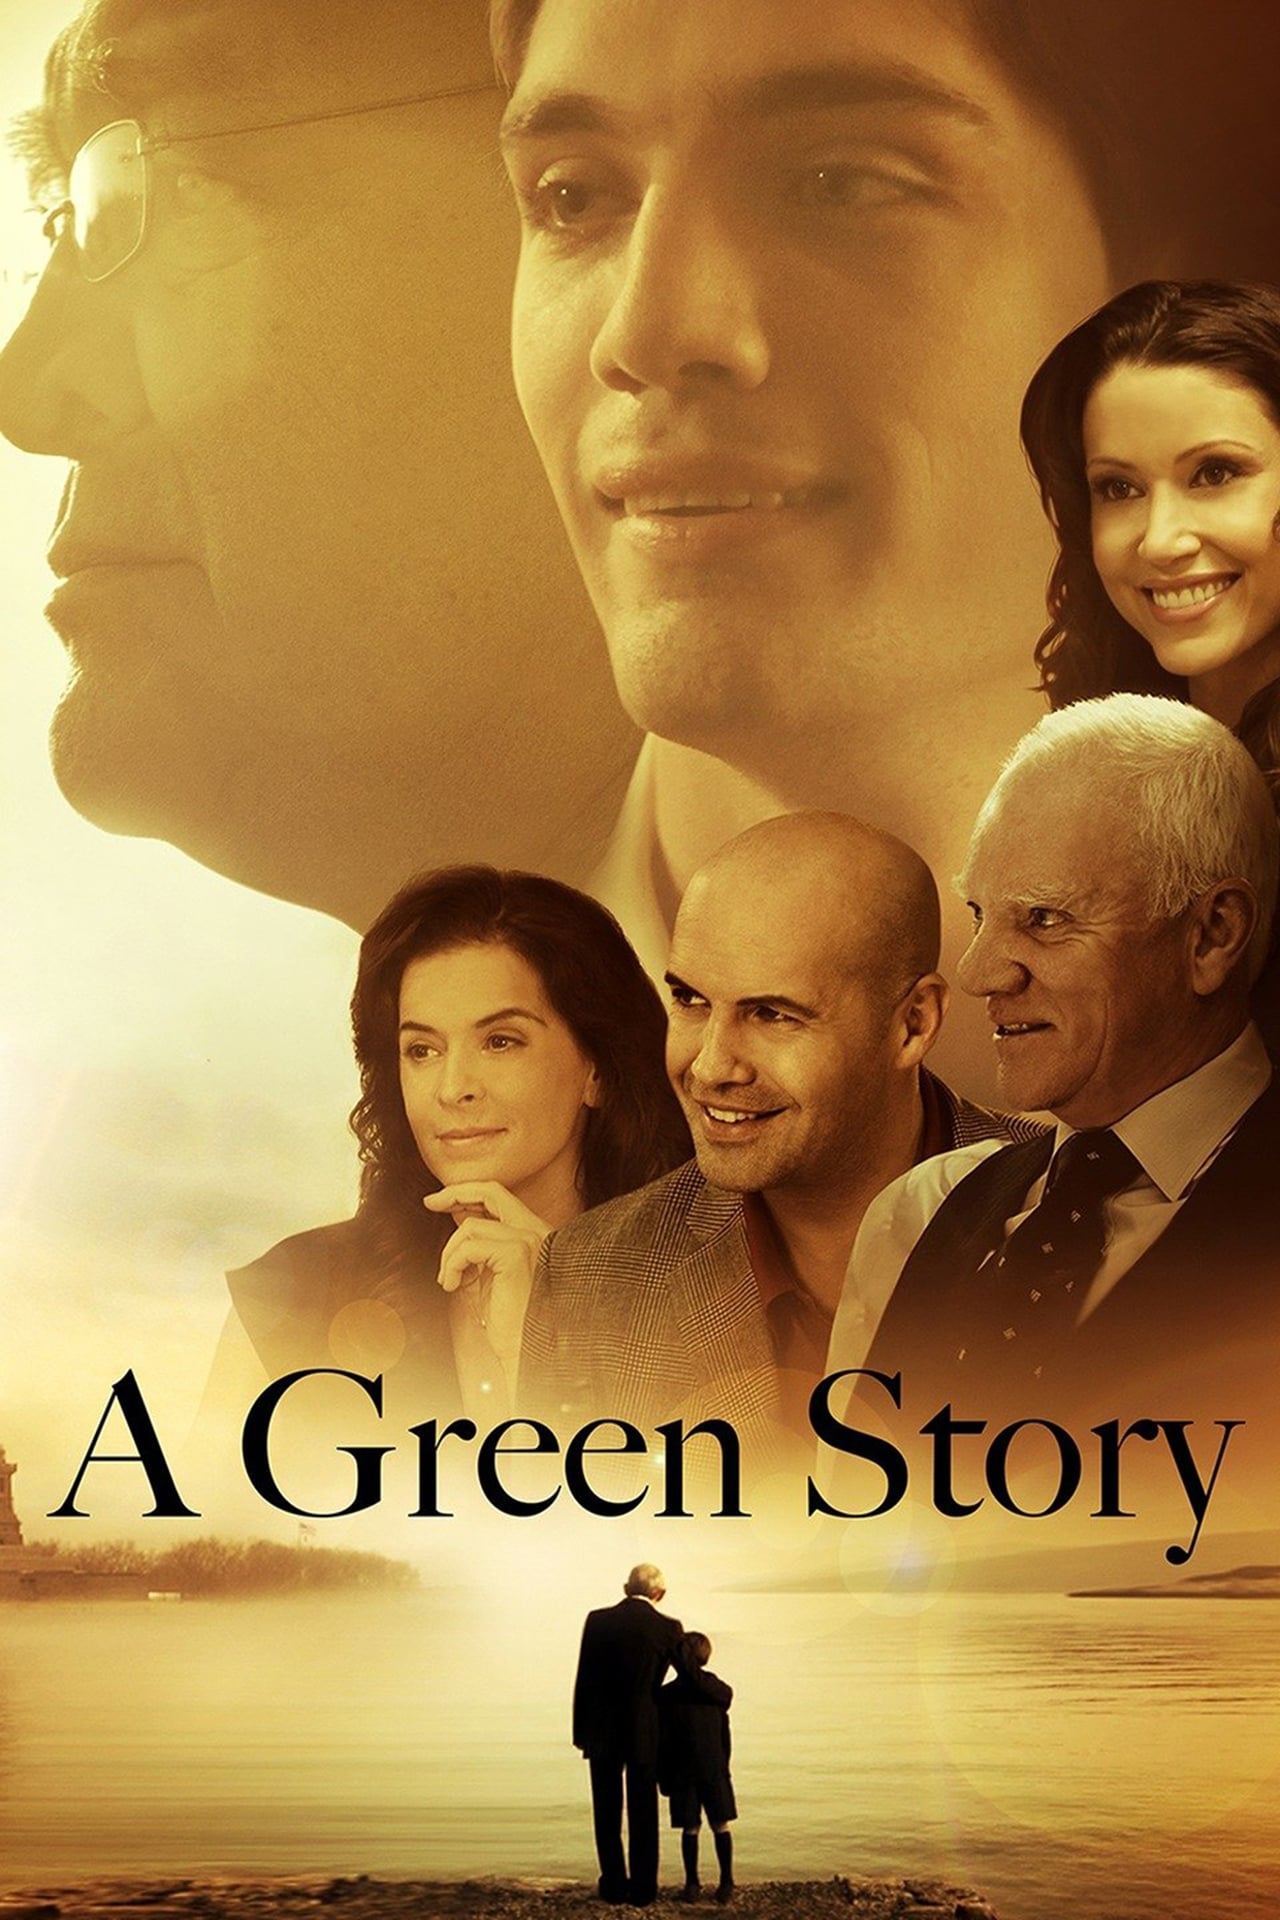 A Green Story